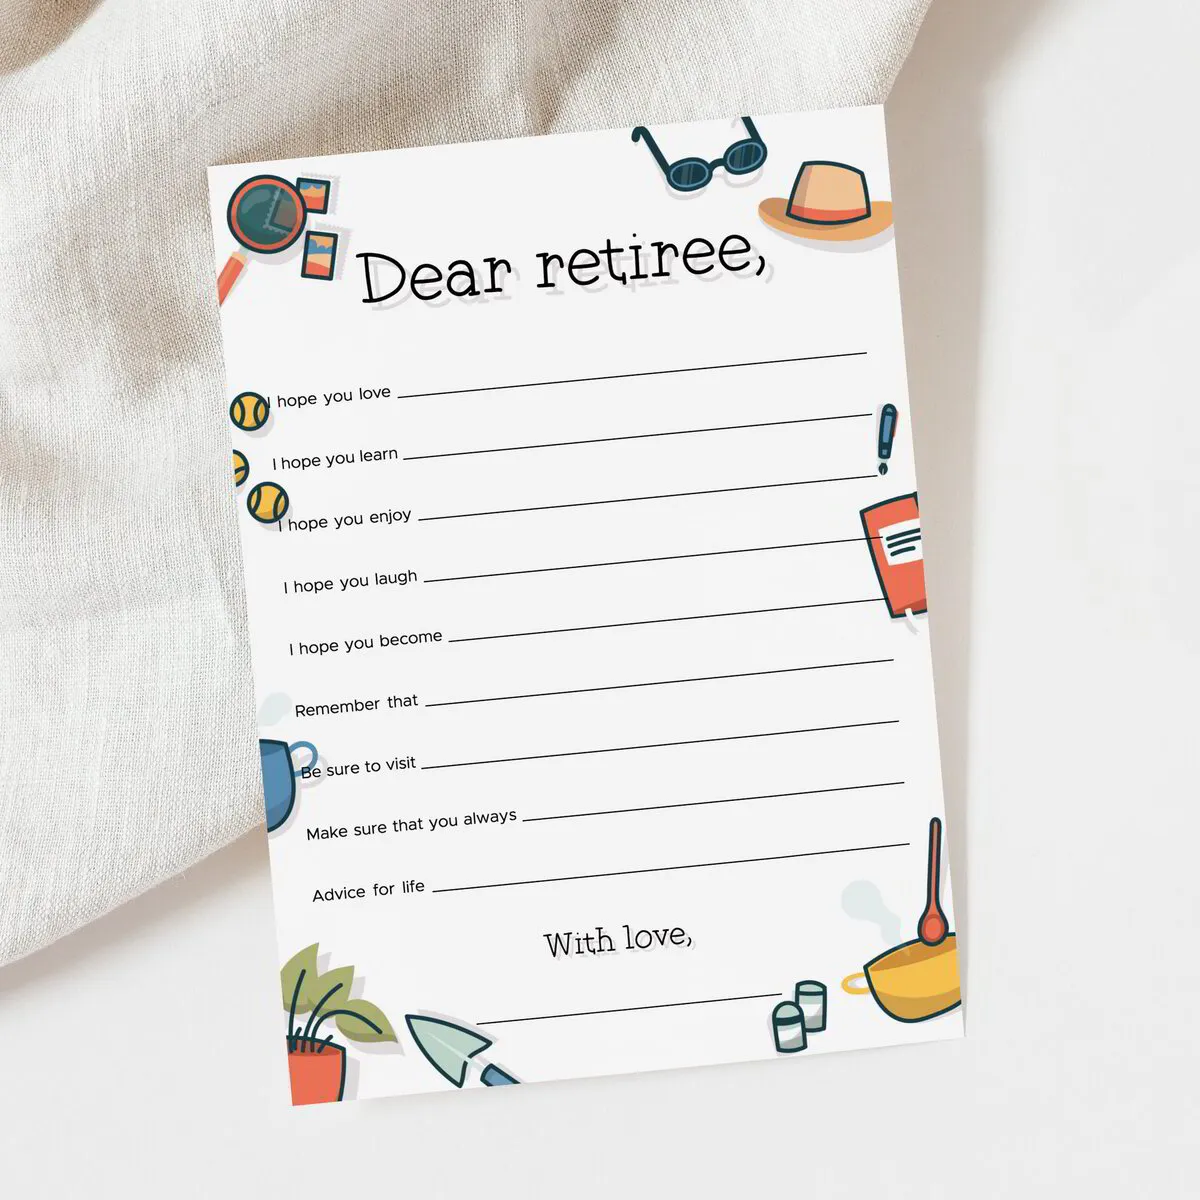 Dear Retiree Wishes Card for Retirement Party Activities